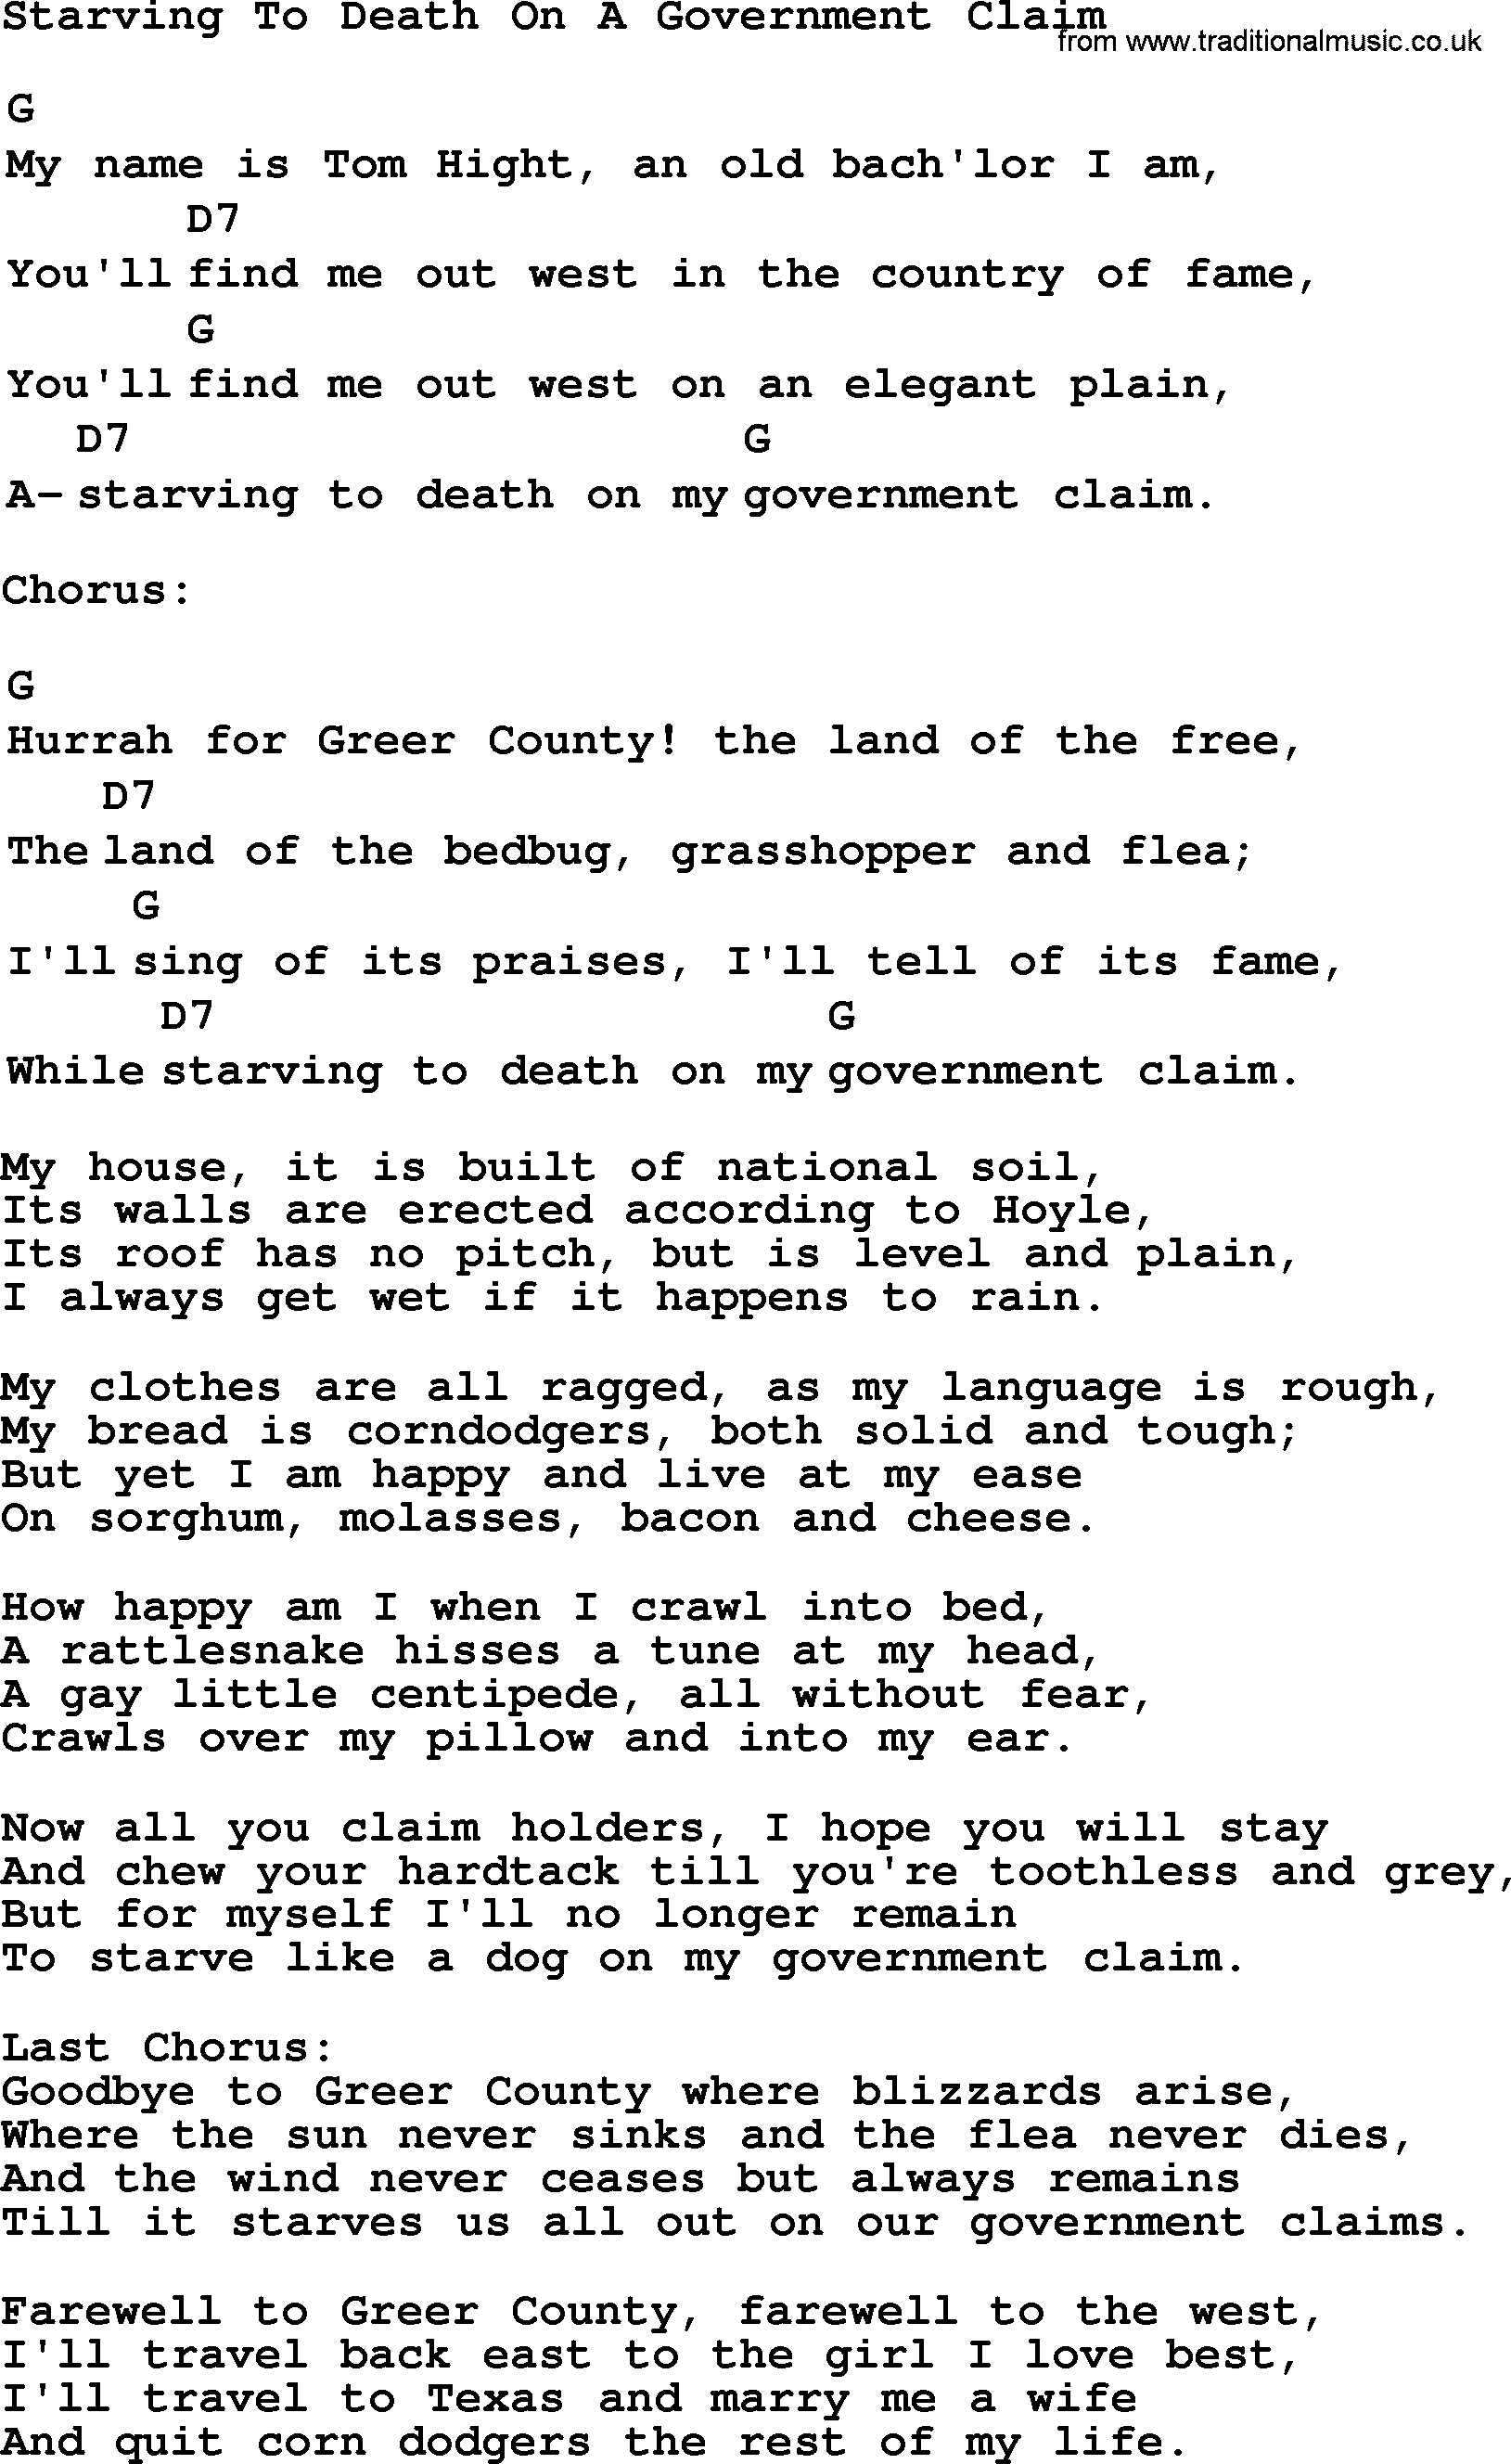 Top 1000 Most Popular Folk and Old-time Songs: Starving To Death On A Government Claim, lyrics and chords